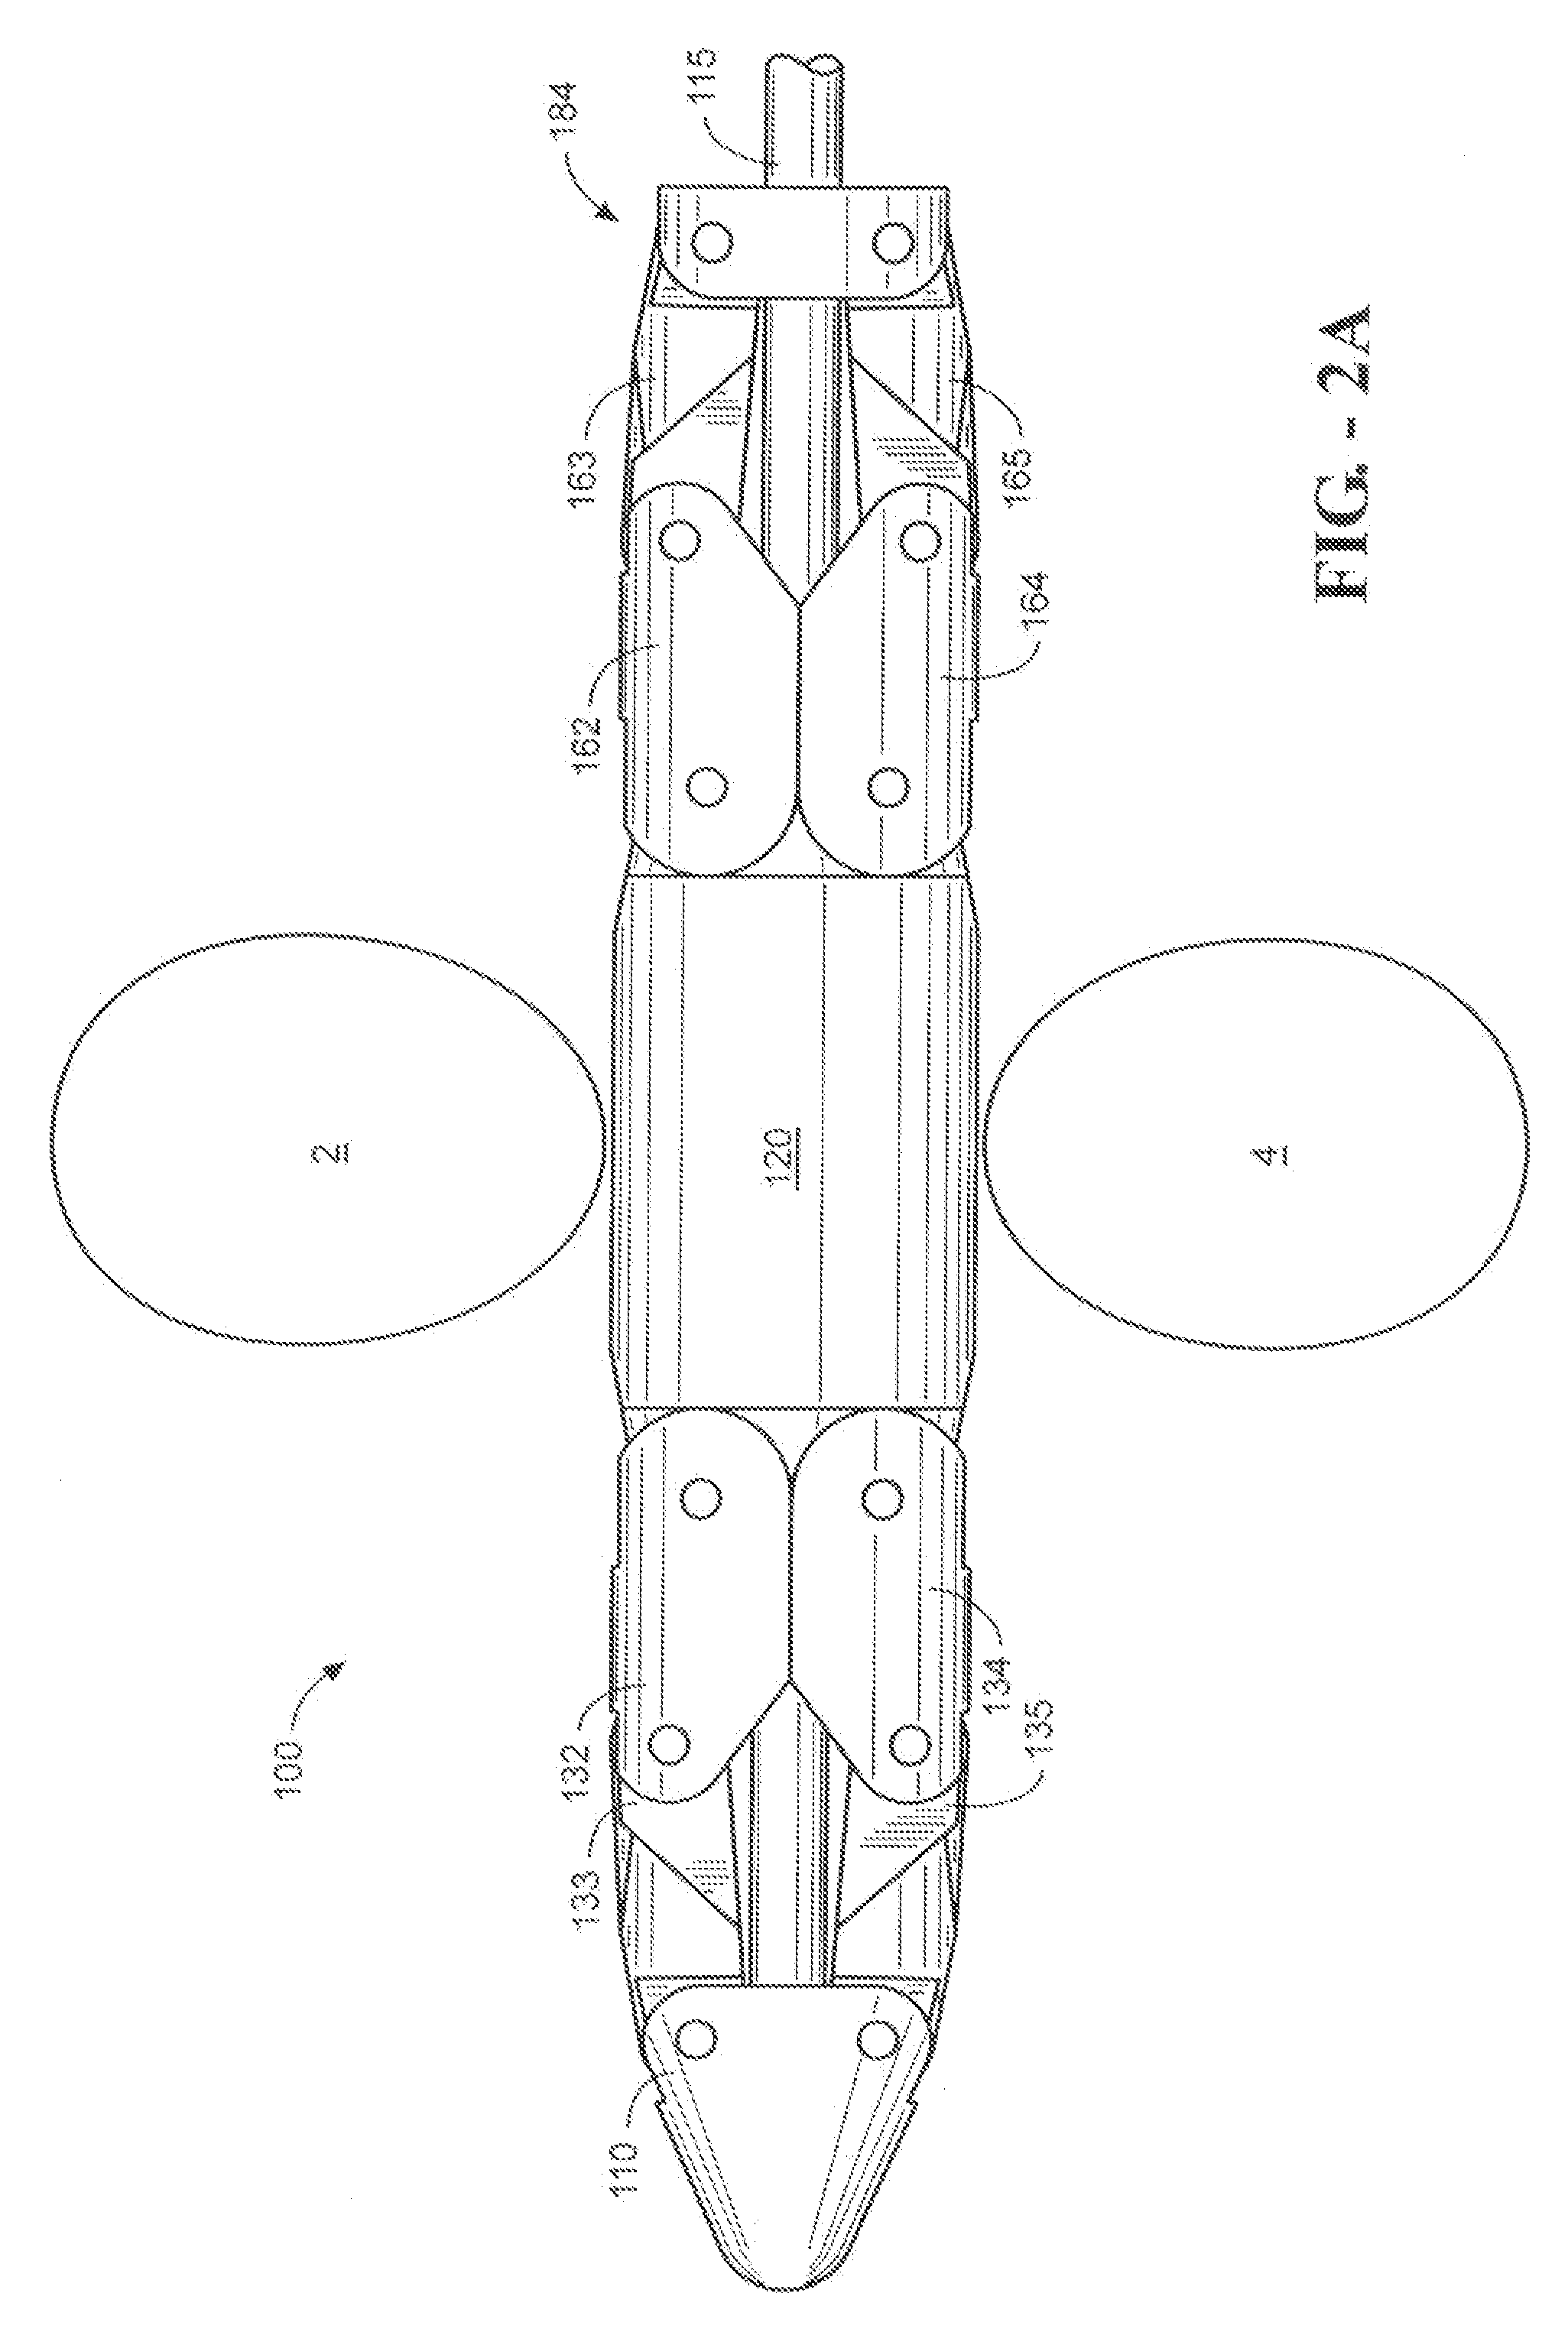 Interspinous process implant having a fixed wing and a deployable wing and method of implantation